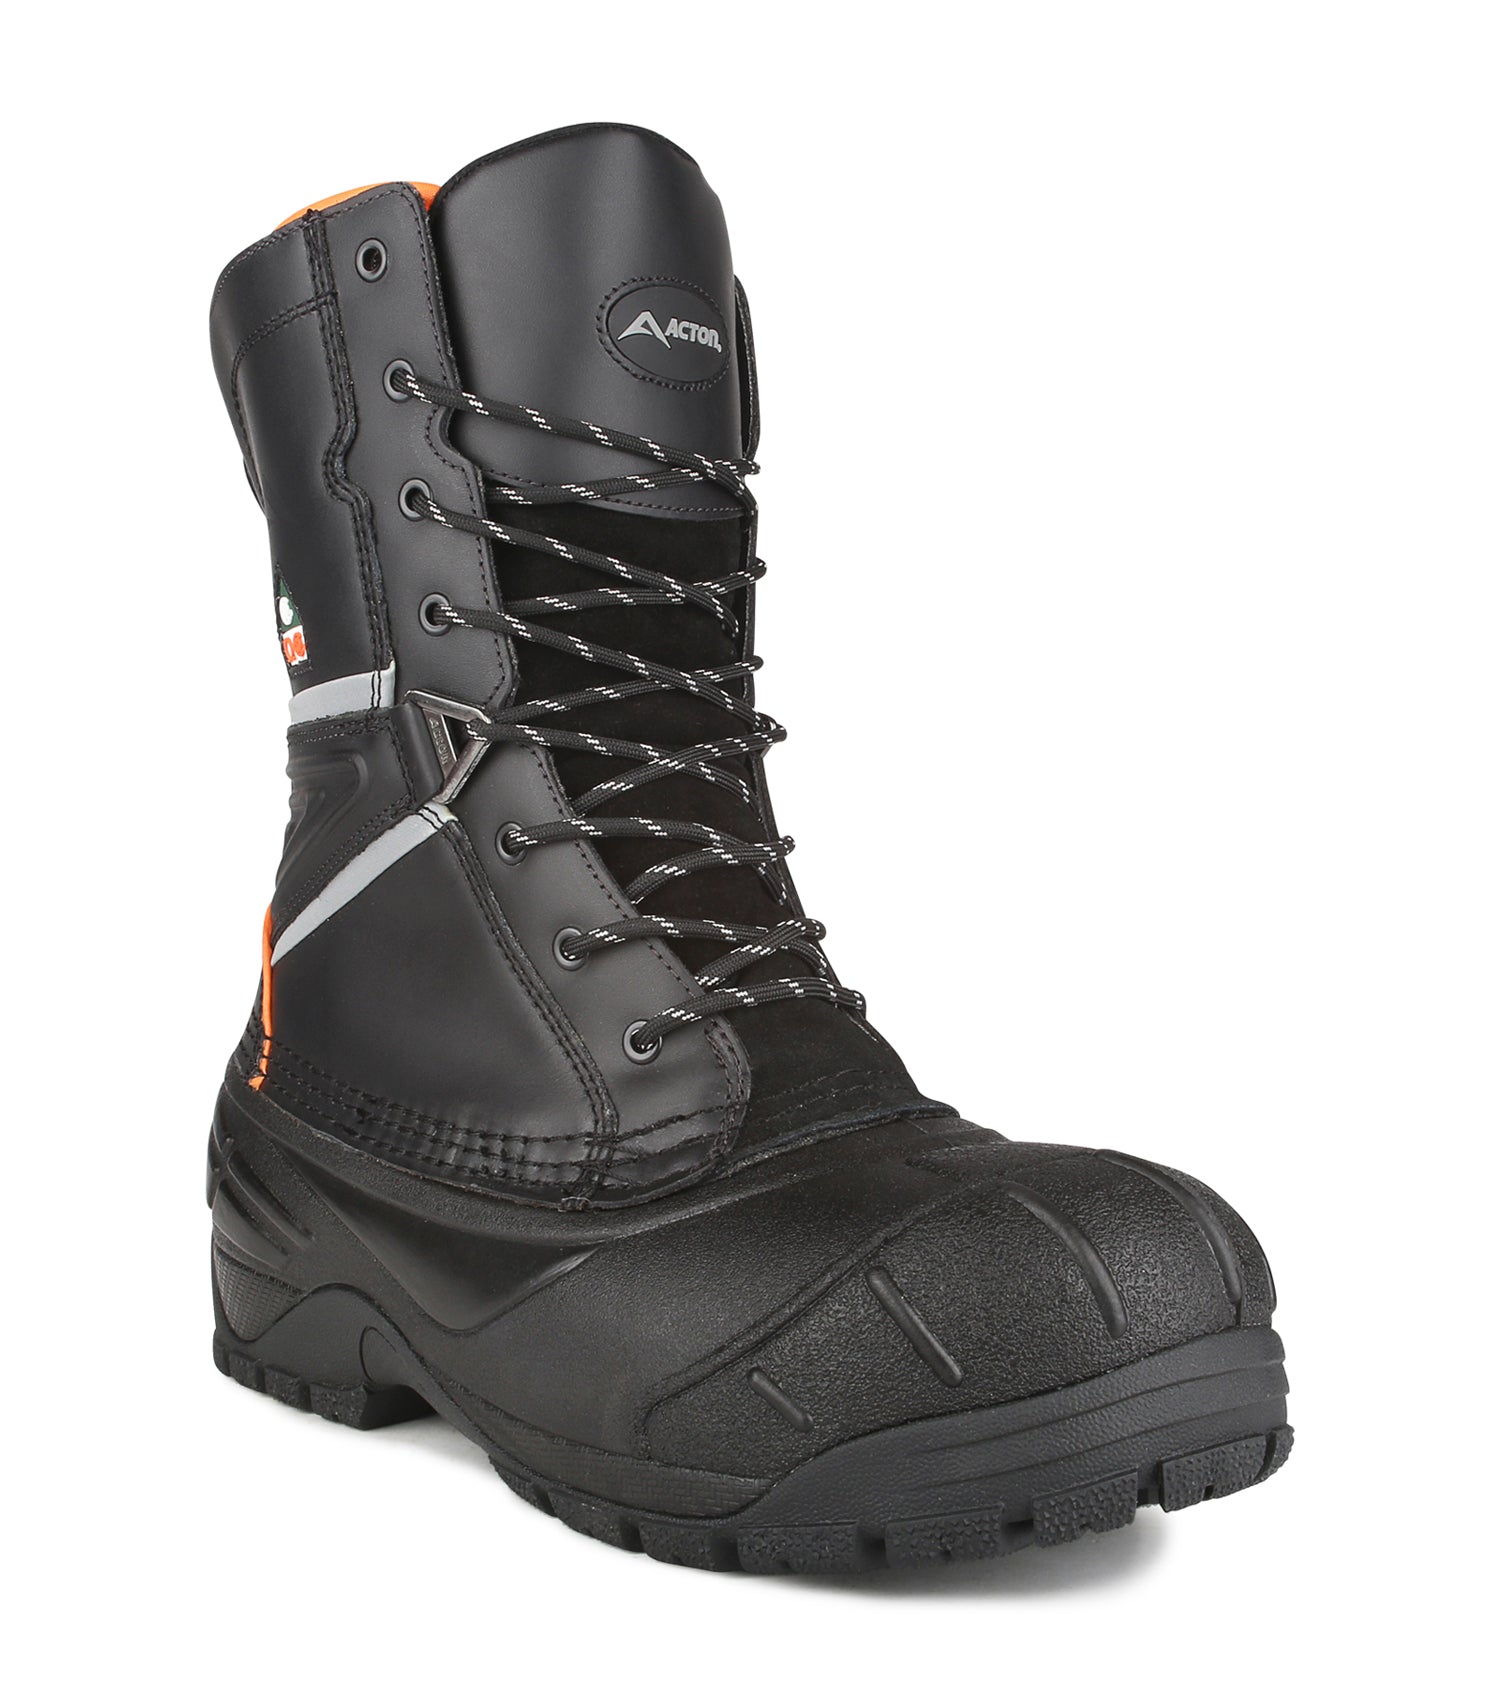 Acton Fighter Construction Boots, Black - Mucksters Supply Corp